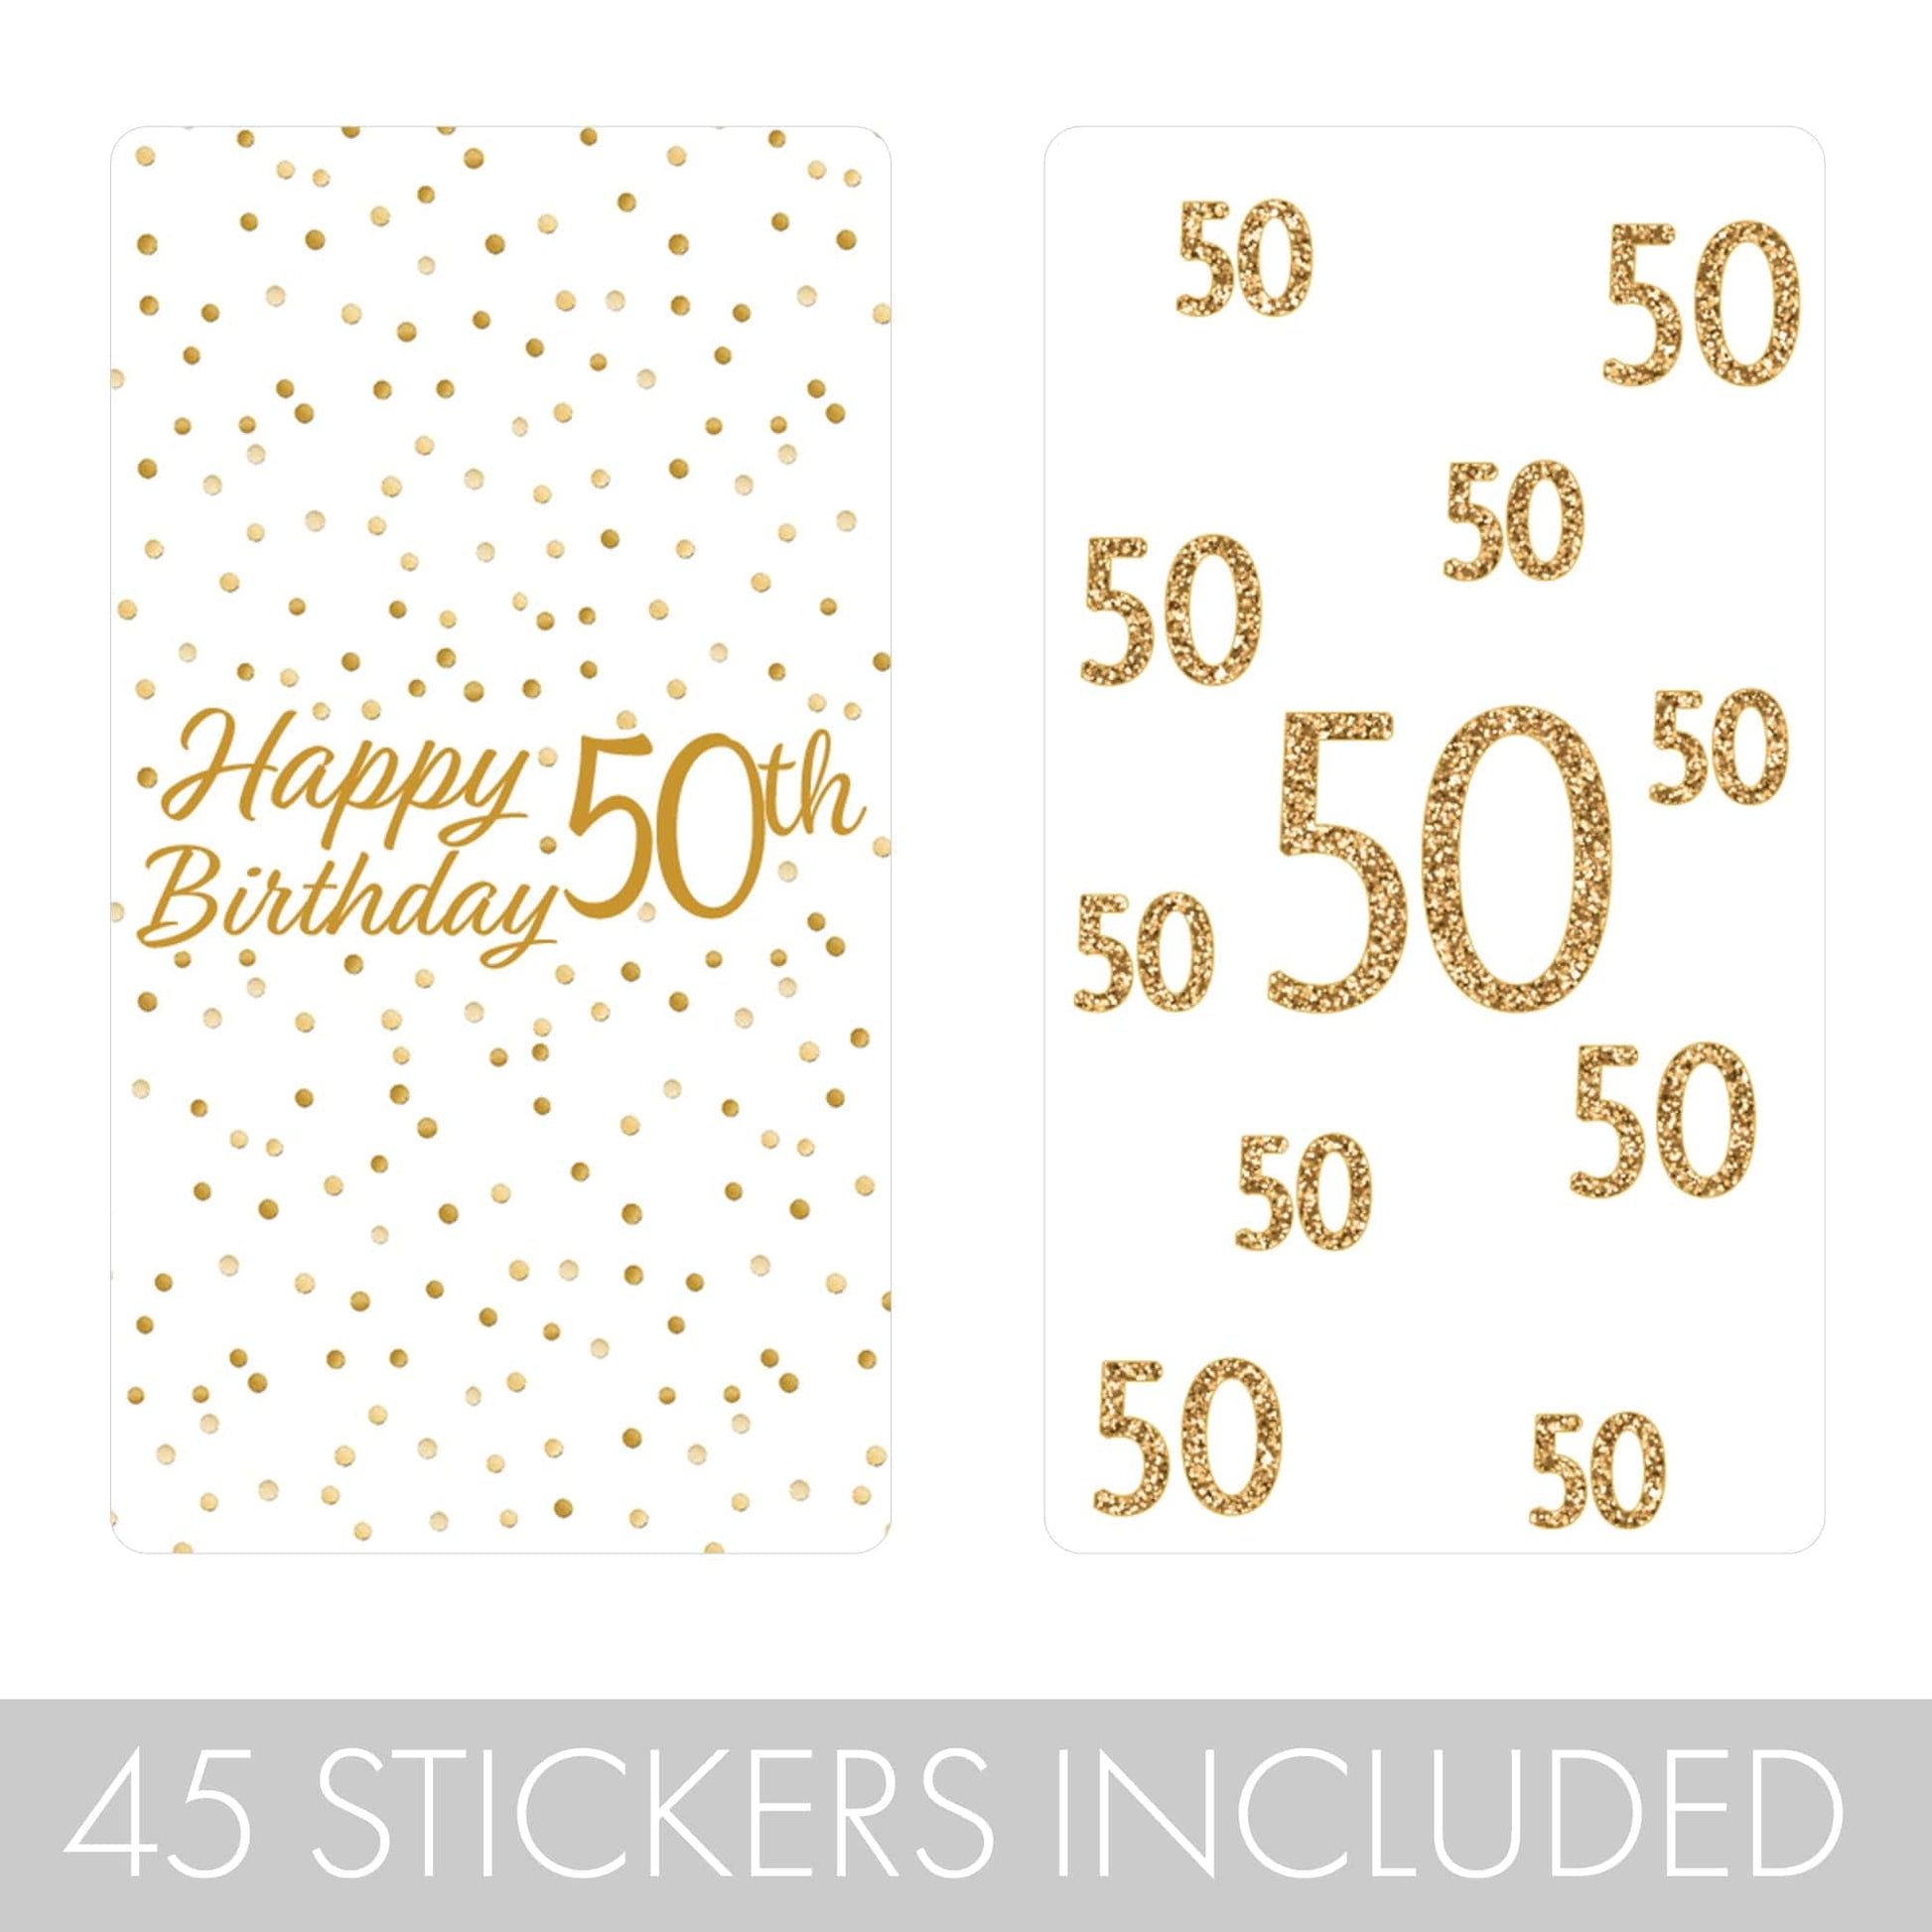 Celebrate a special 50th birthday with these white and gold mini candy bar stickers.